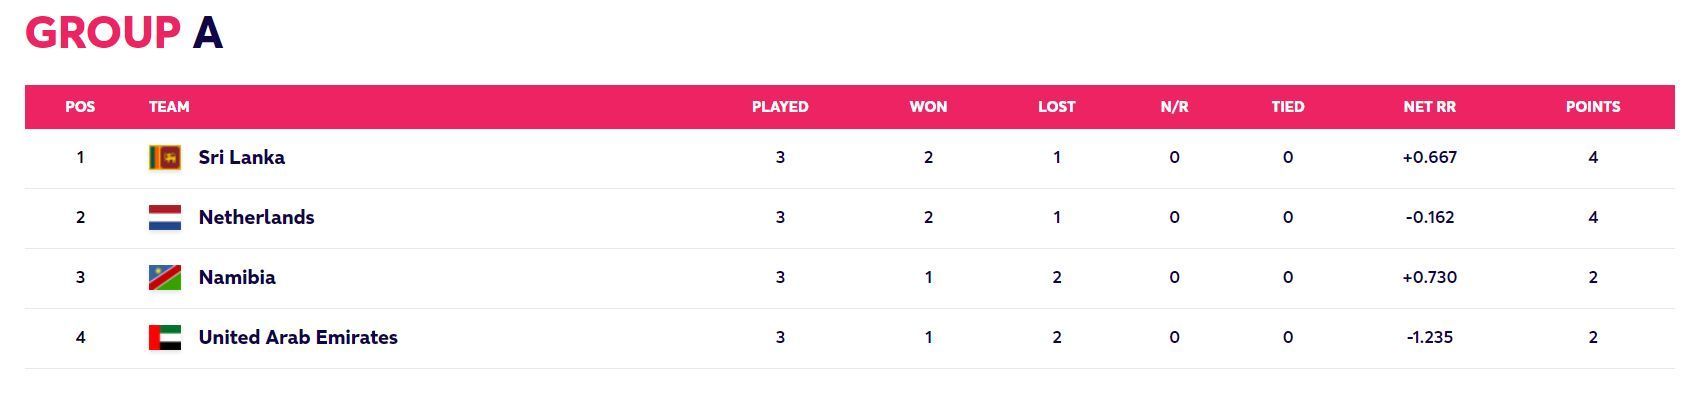 Updated Points Table after Match 10 (Image Courtesy: www.t20worldcup.com)